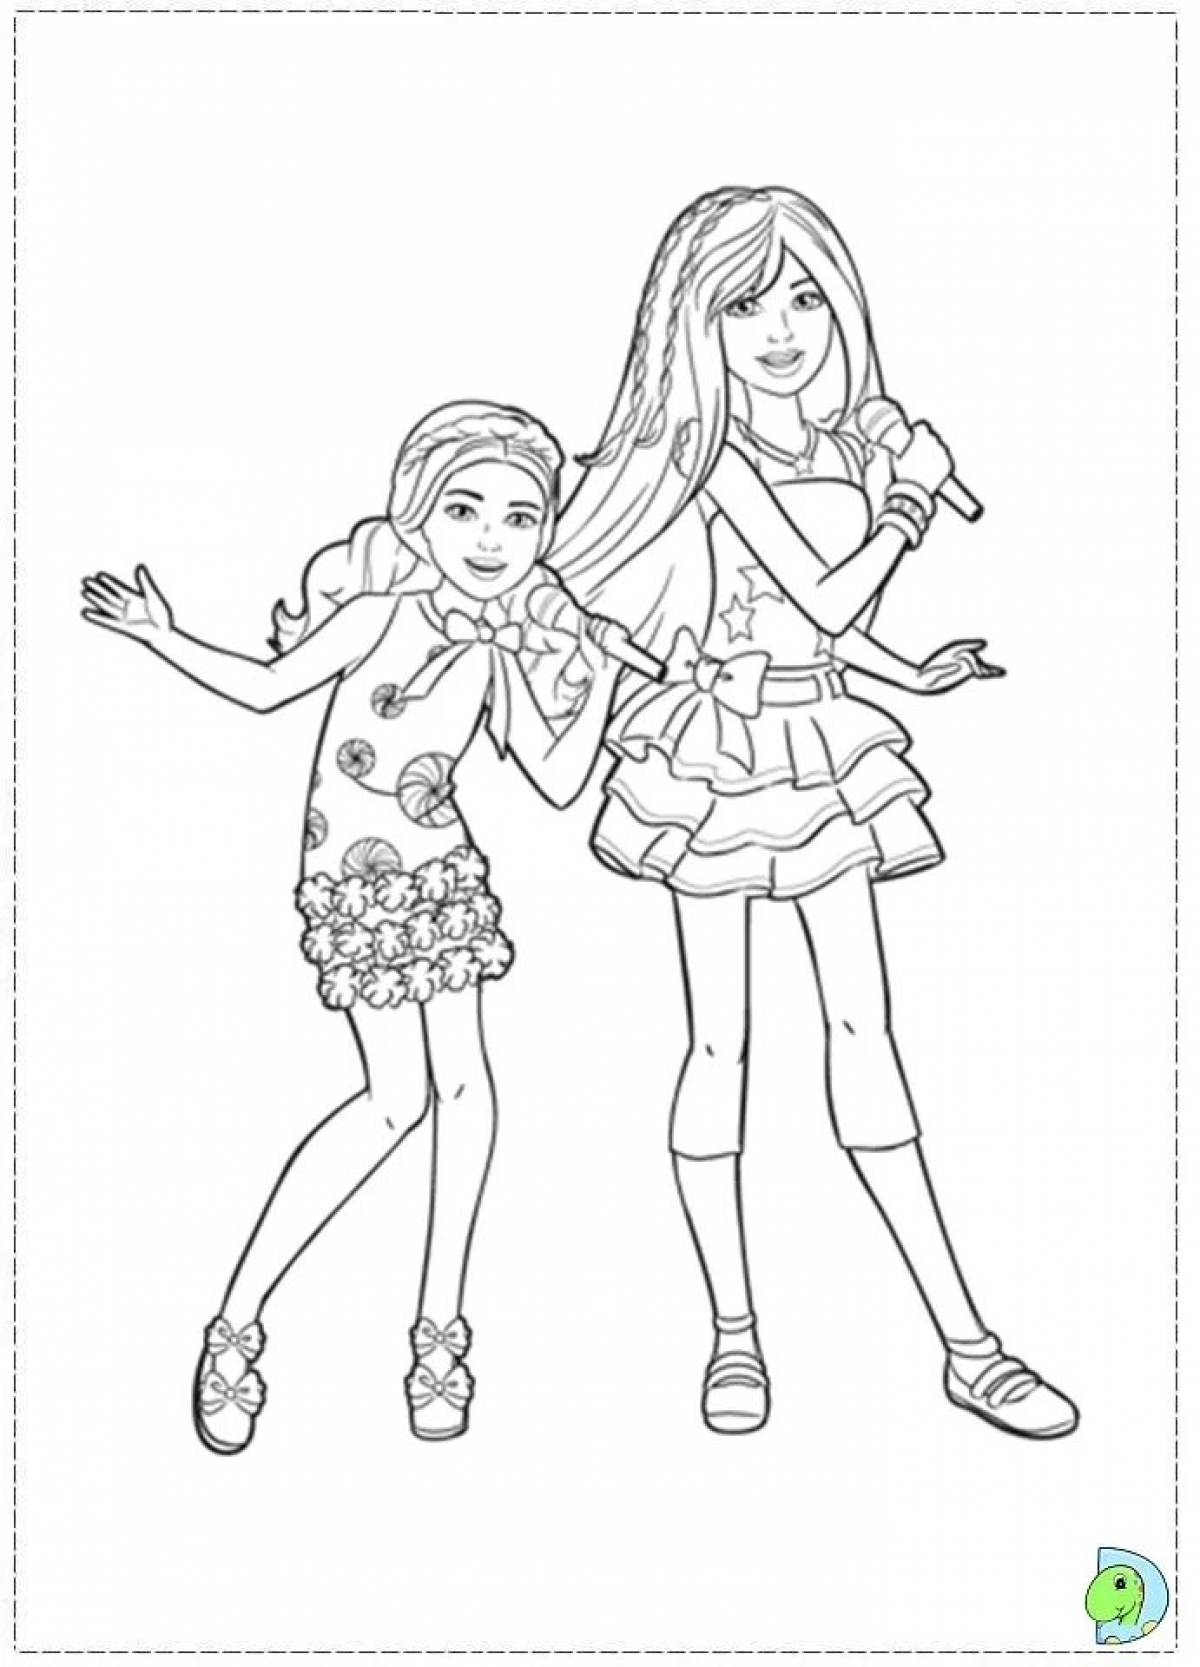 Bright Chelsea Barbie Coloring Page